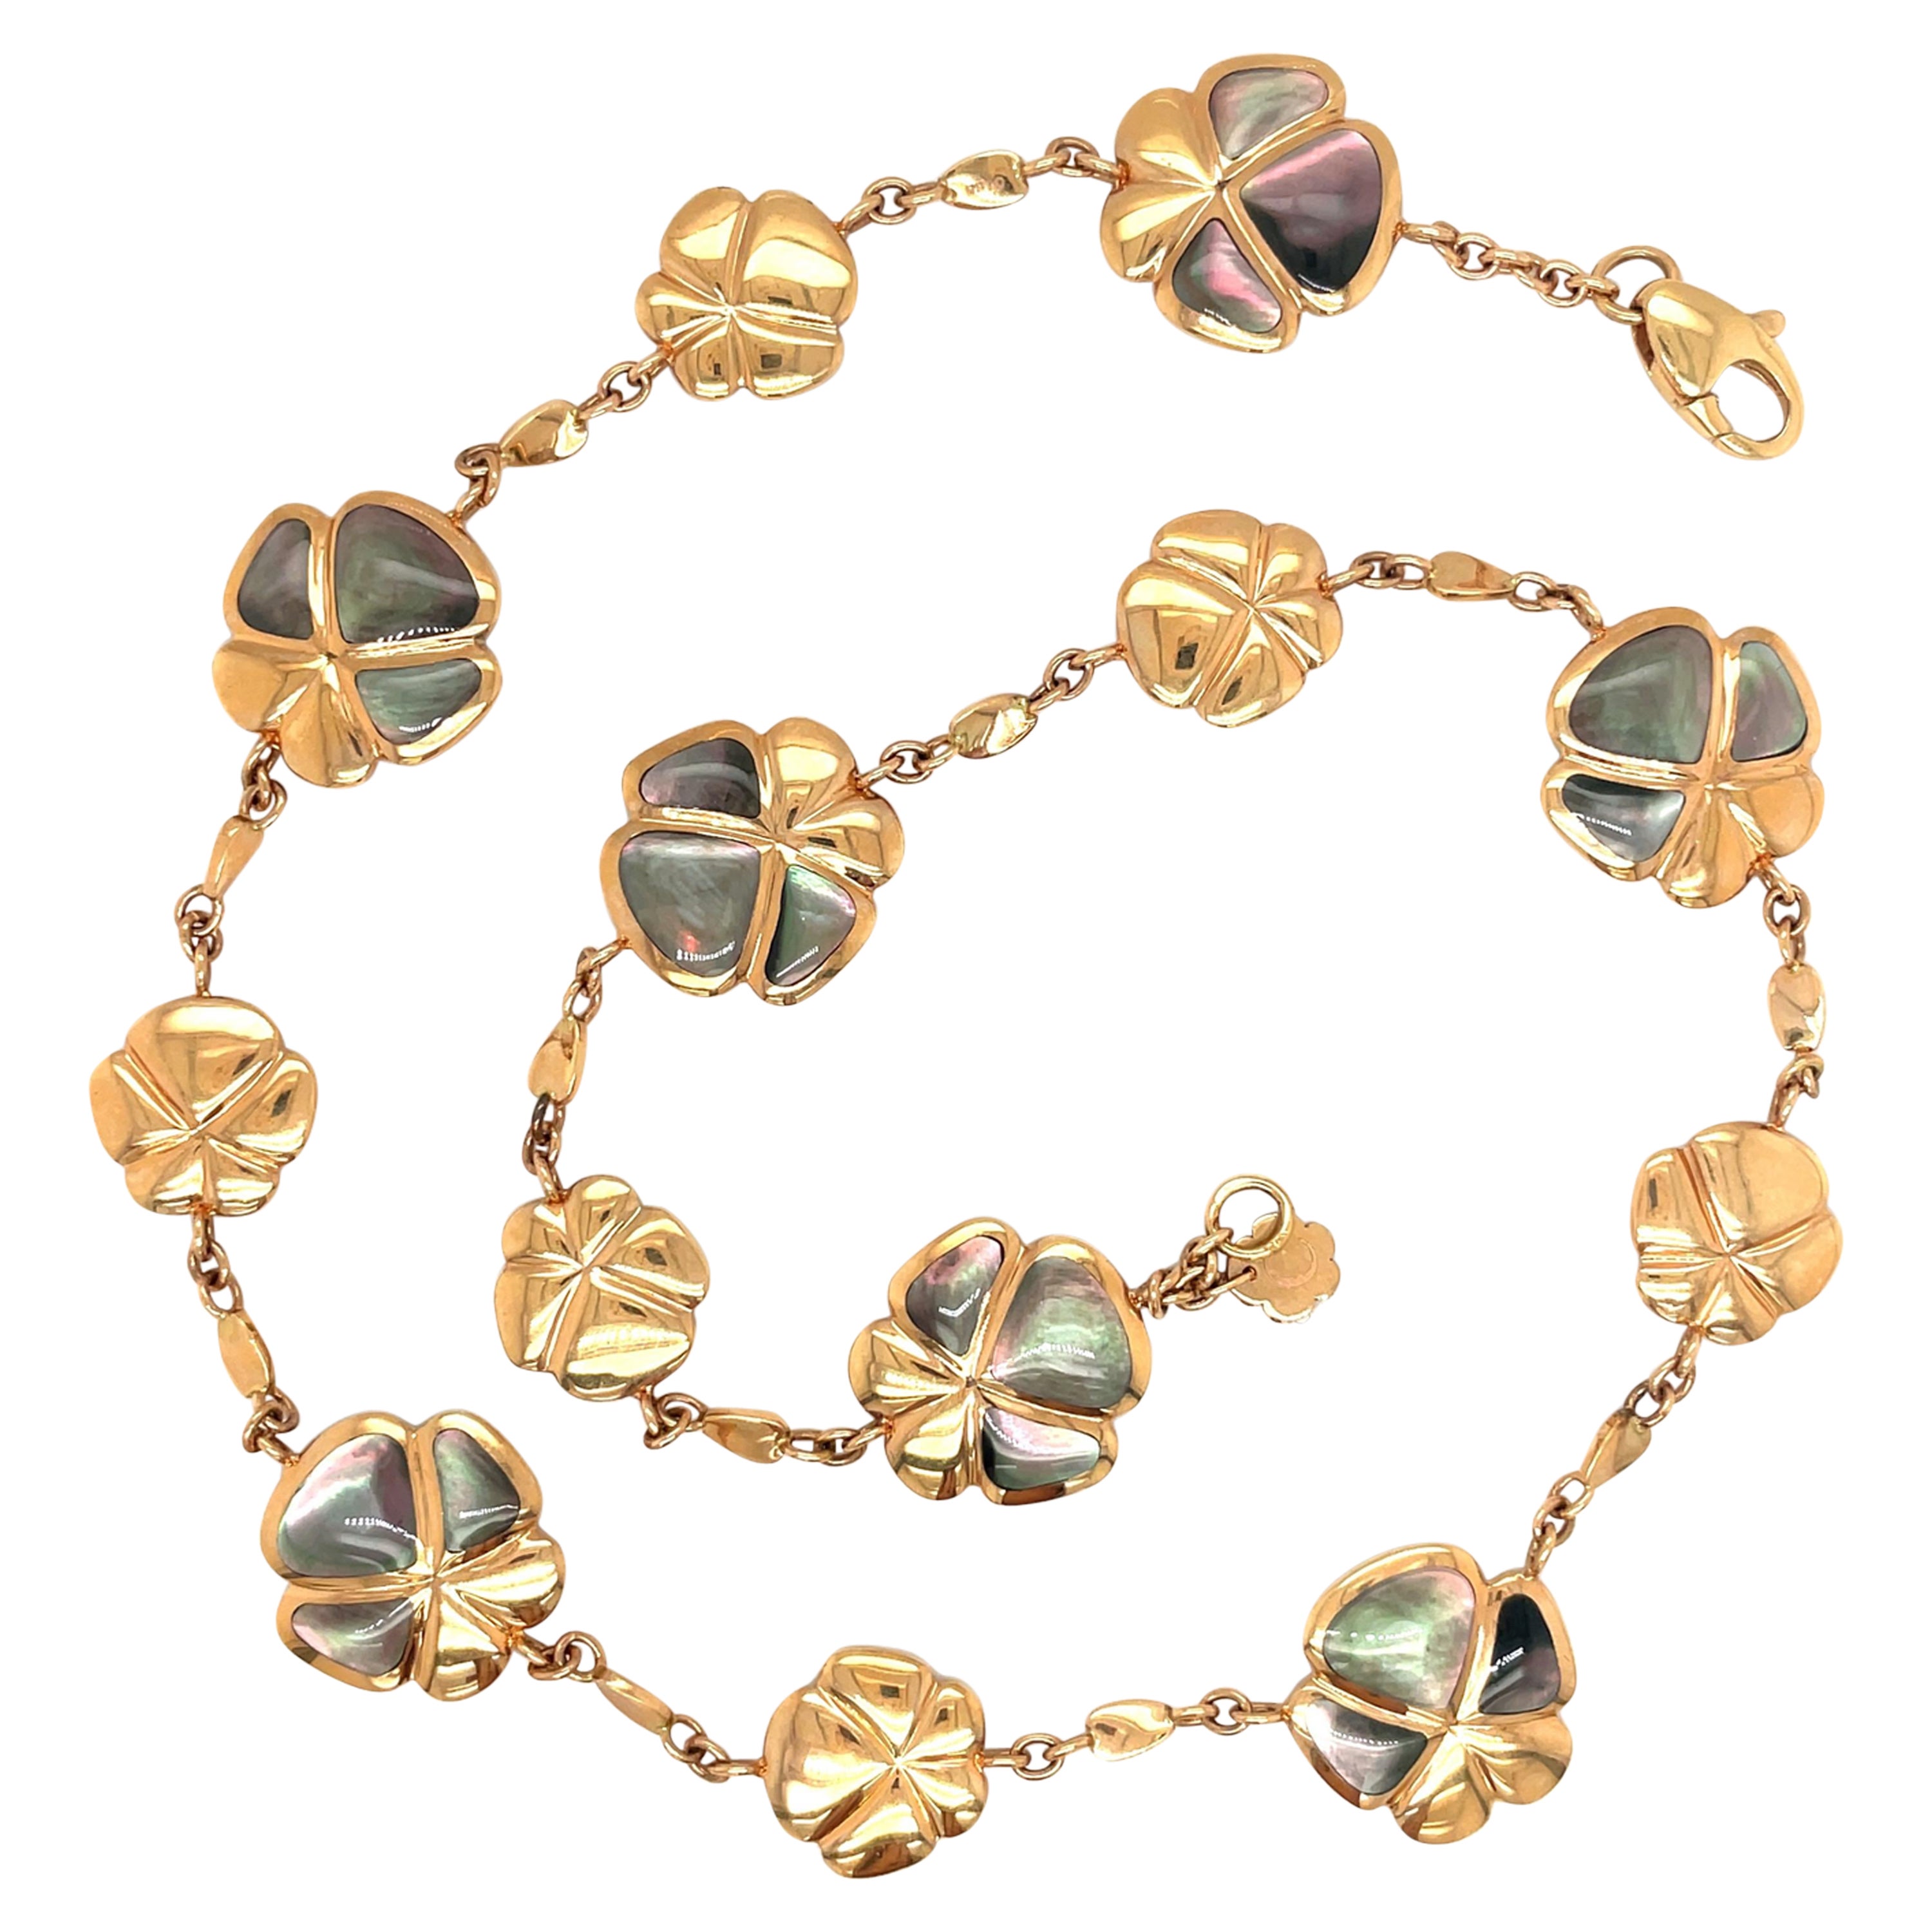 18KT Rose Gold Viola Flower Necklace with Inlayed Mother of Pearl Petals